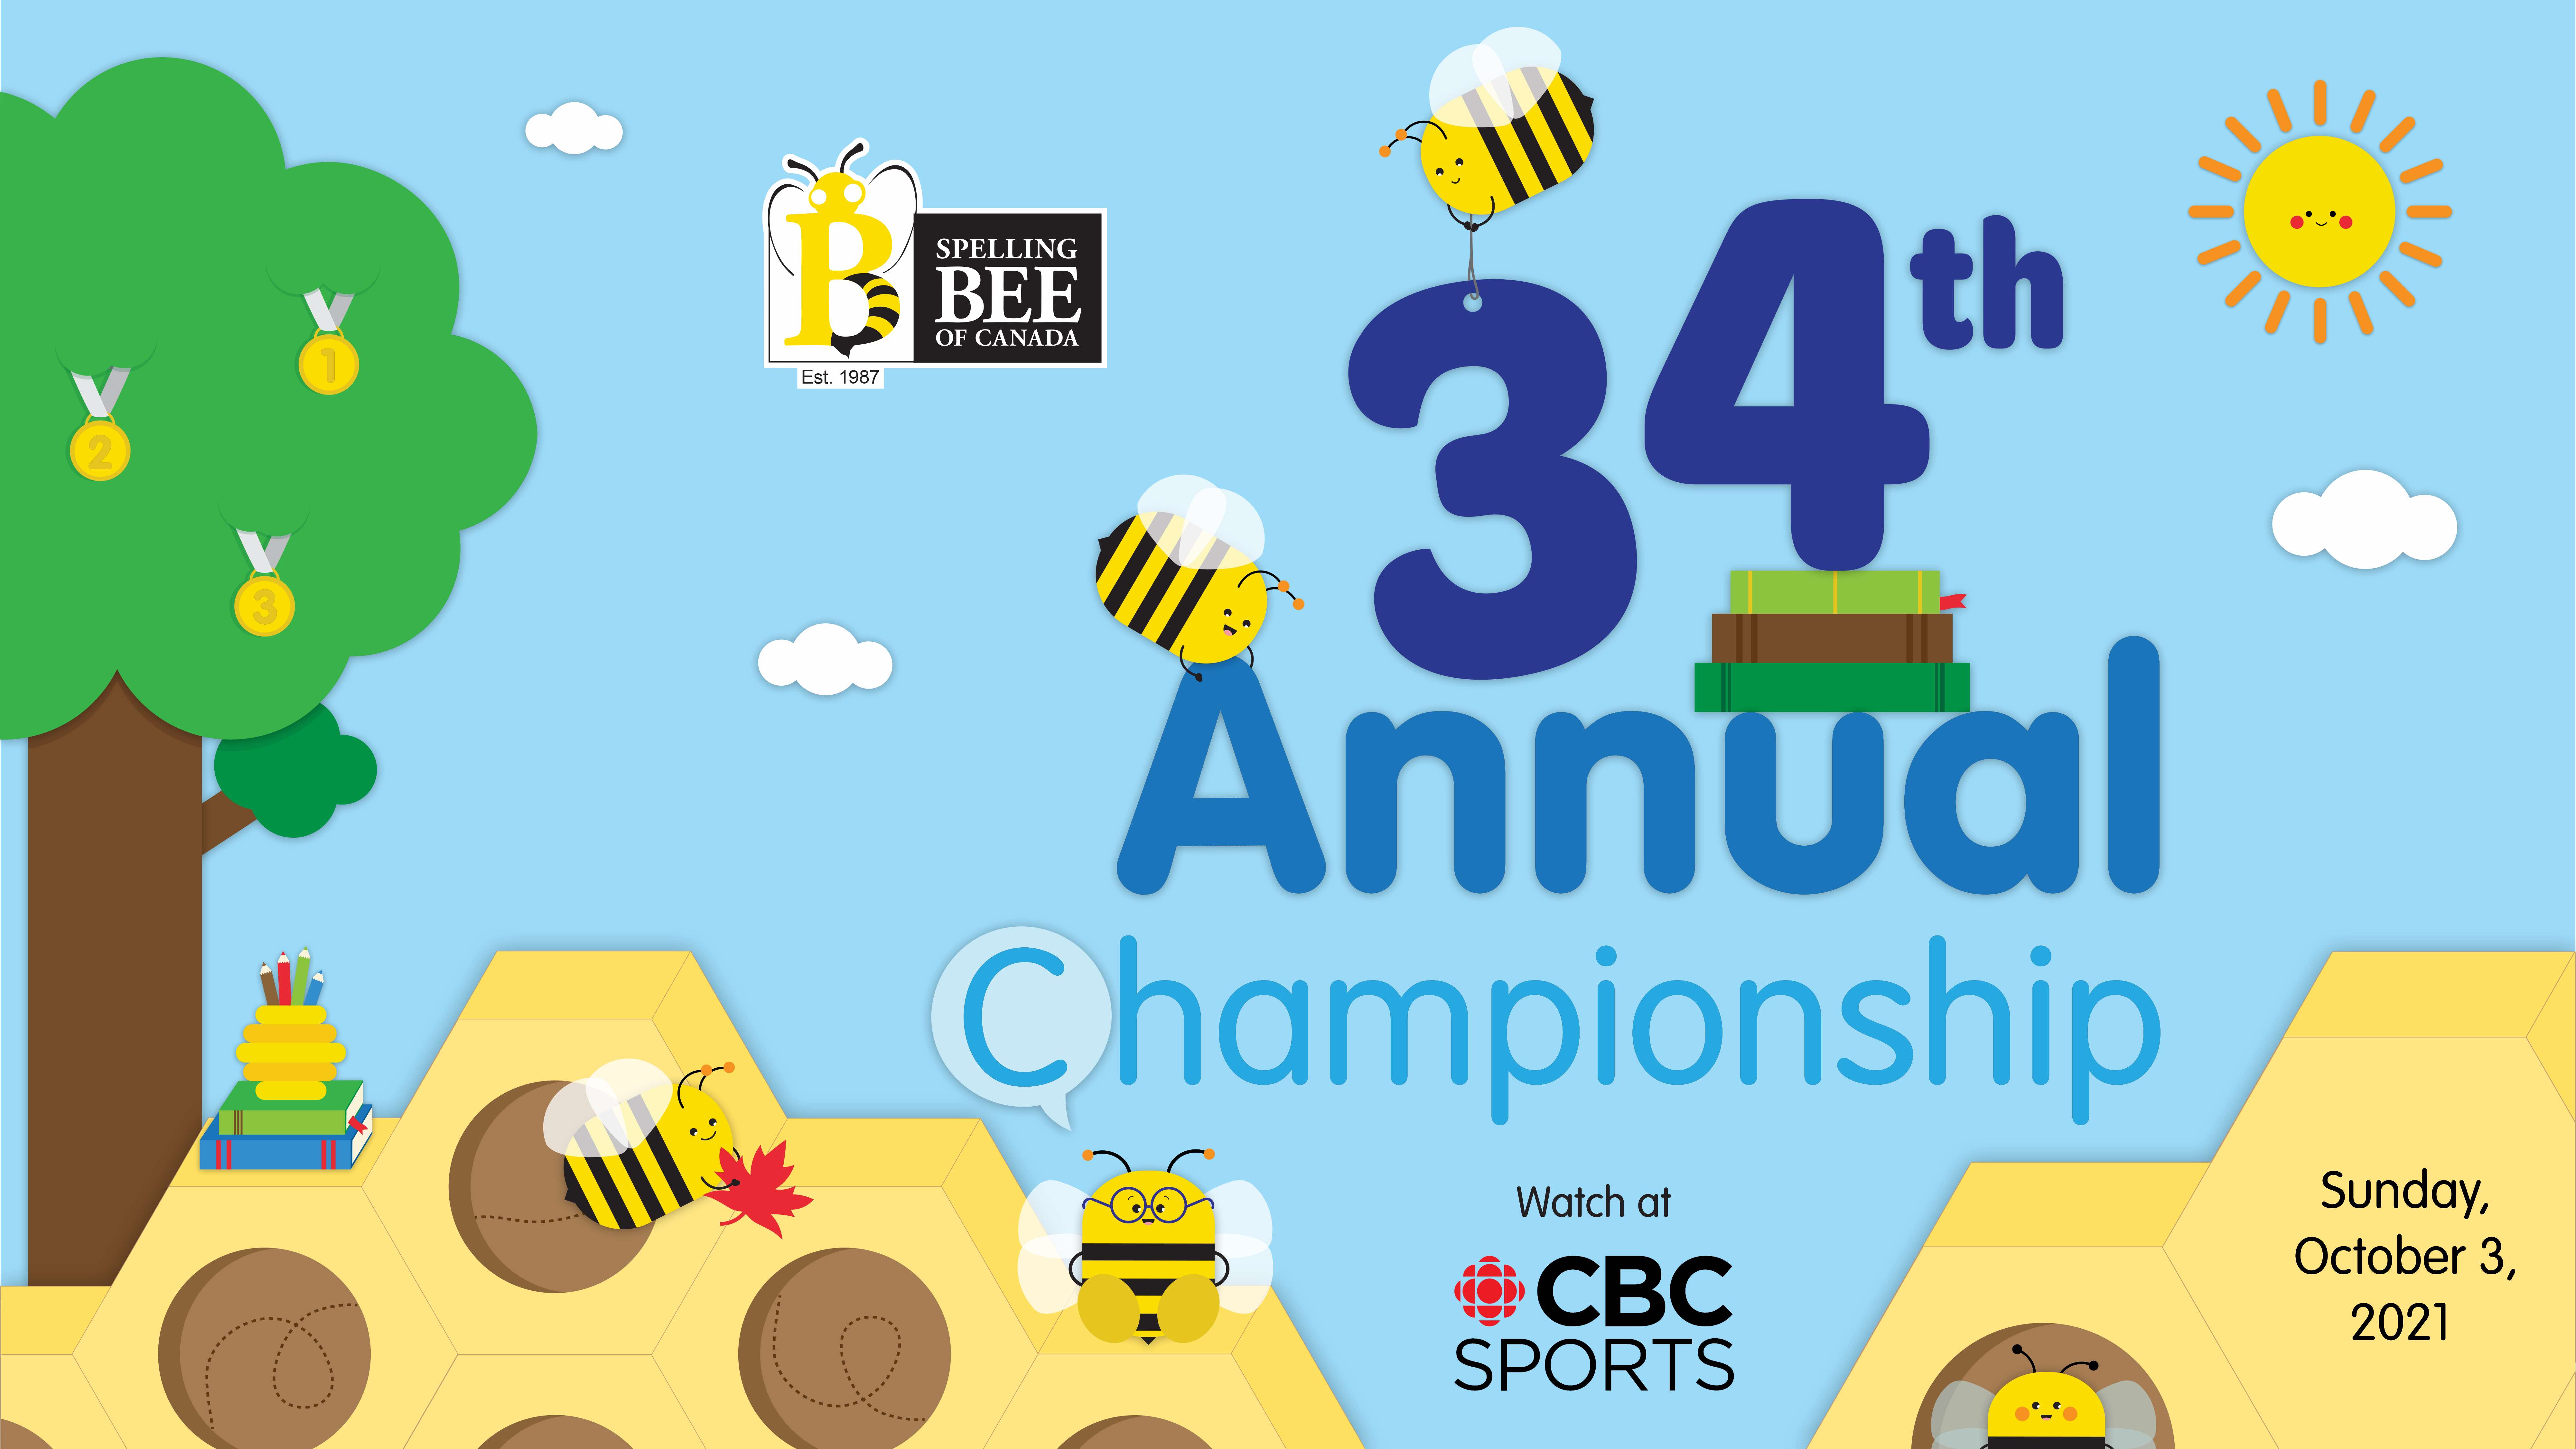 Spelling Bee of Canada - 34th Annual Championship Cover